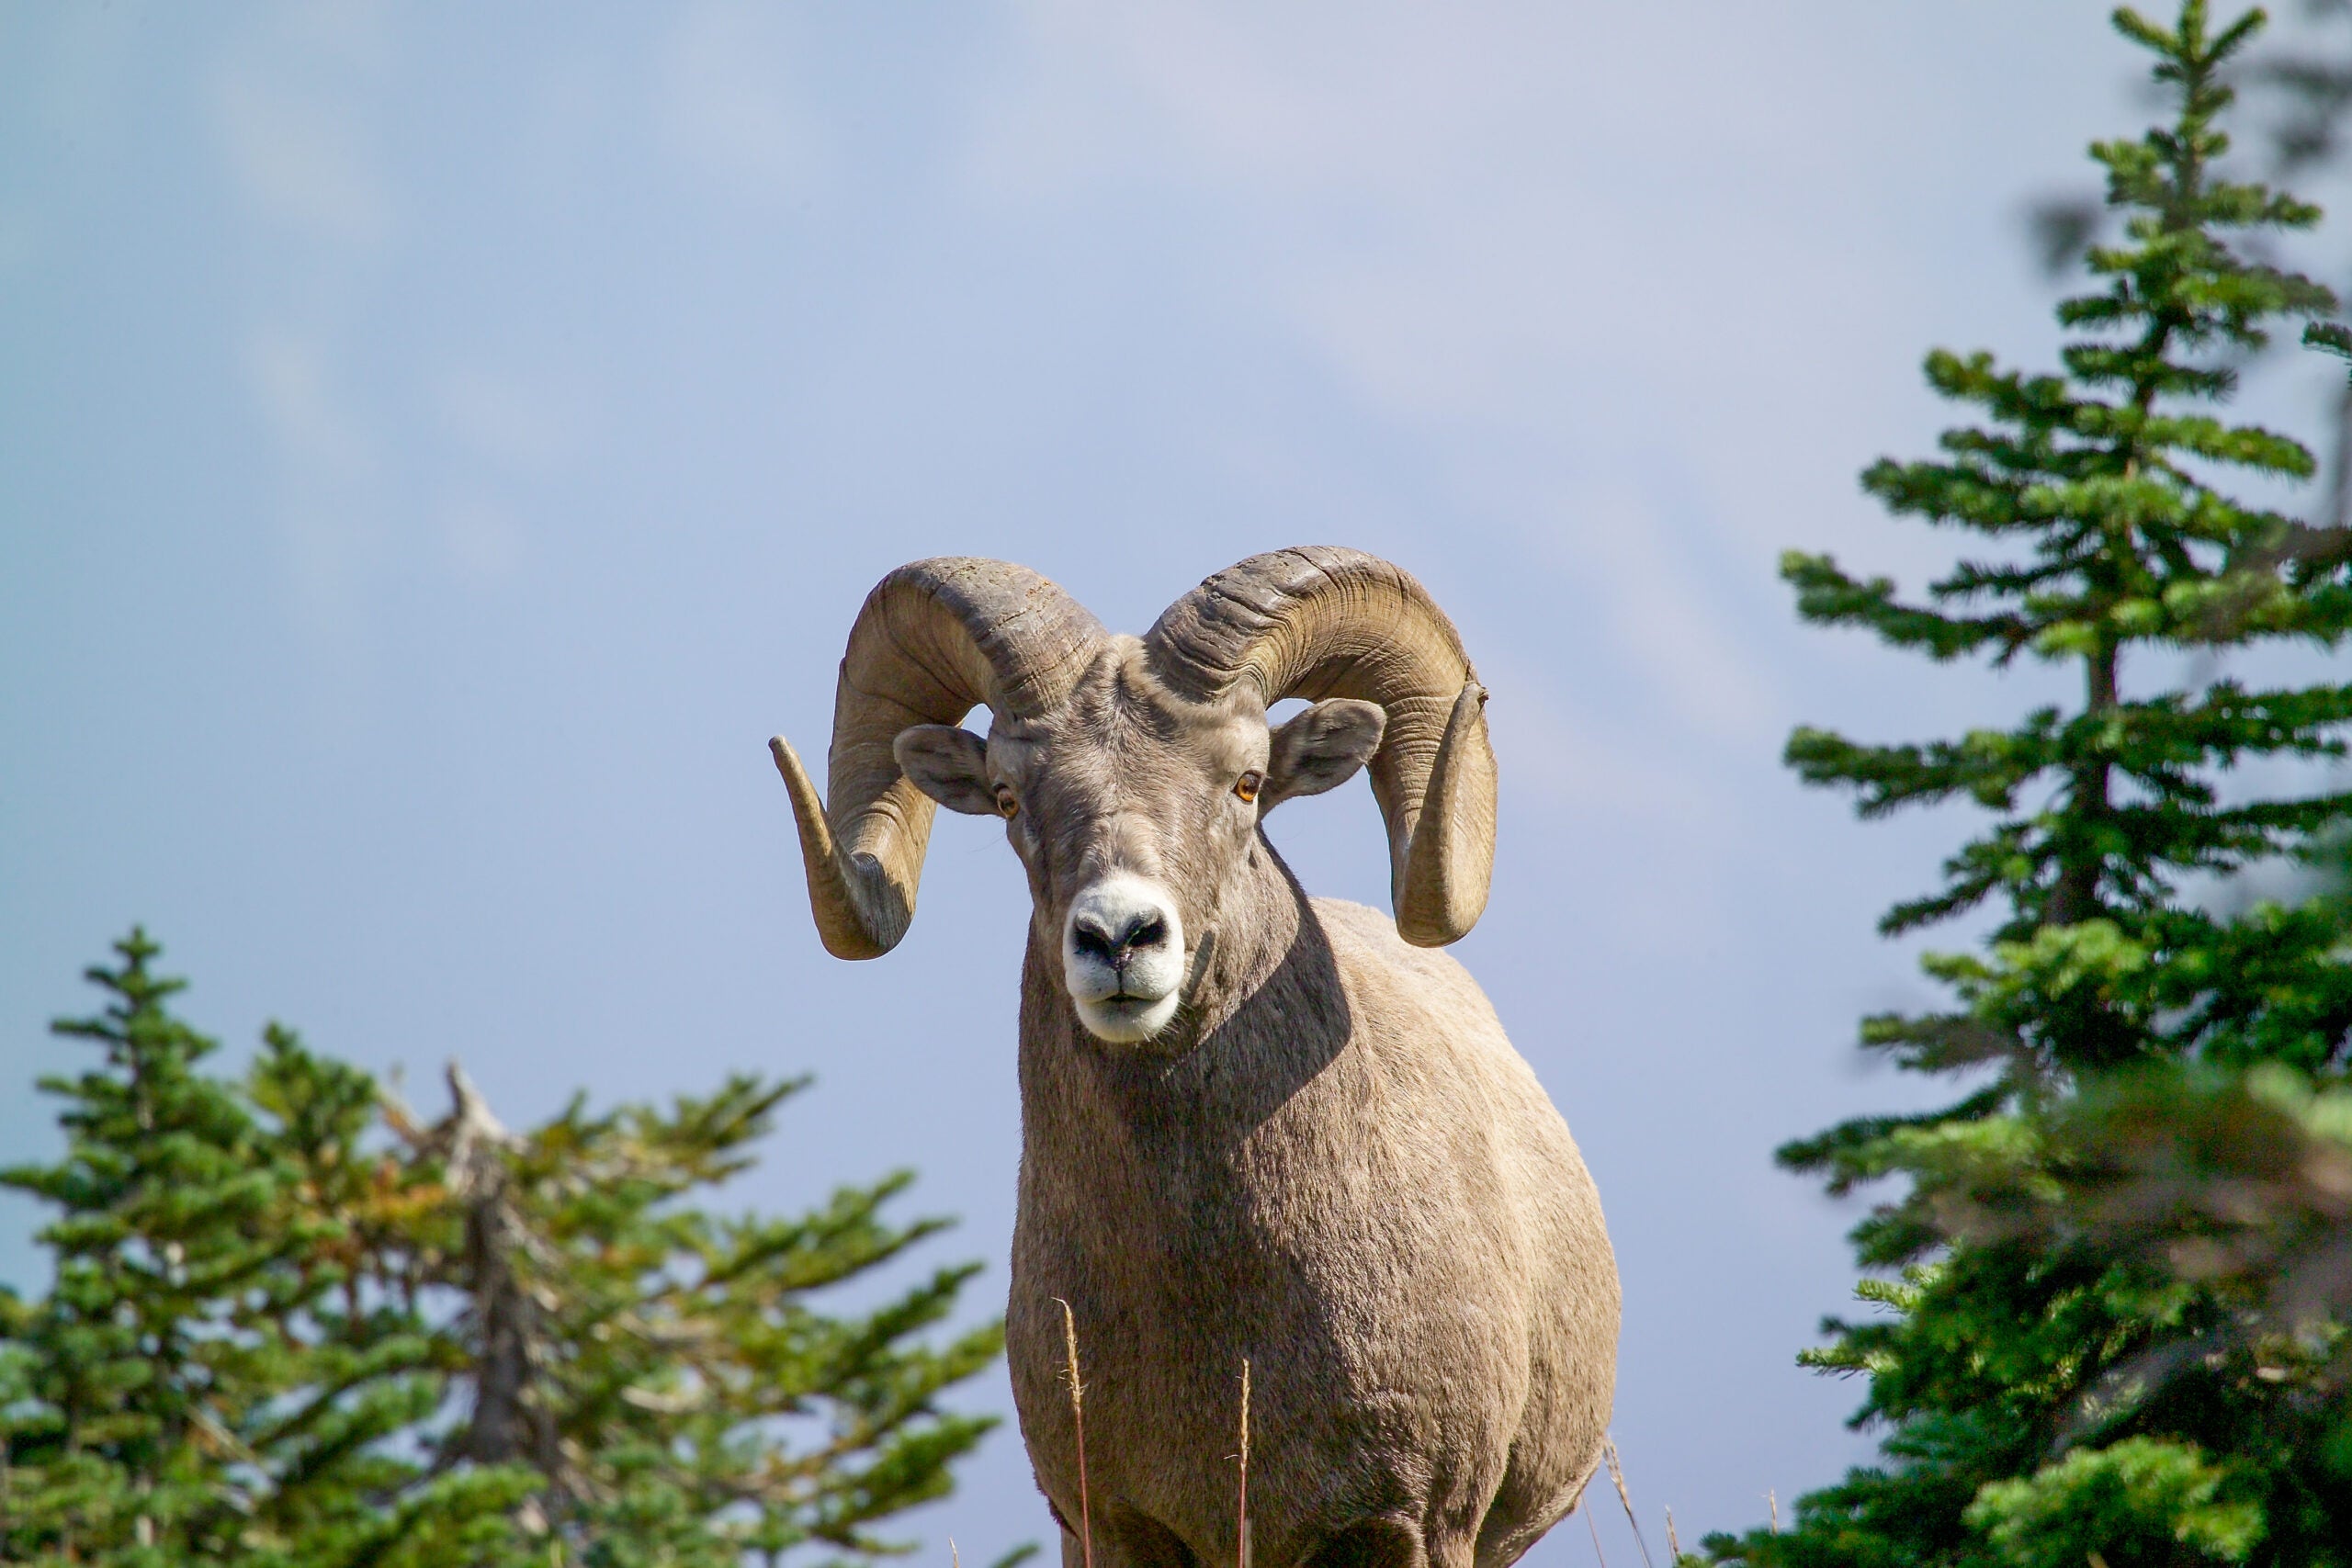 Fire Suppression is Hurting Bighorn Sheep Populations